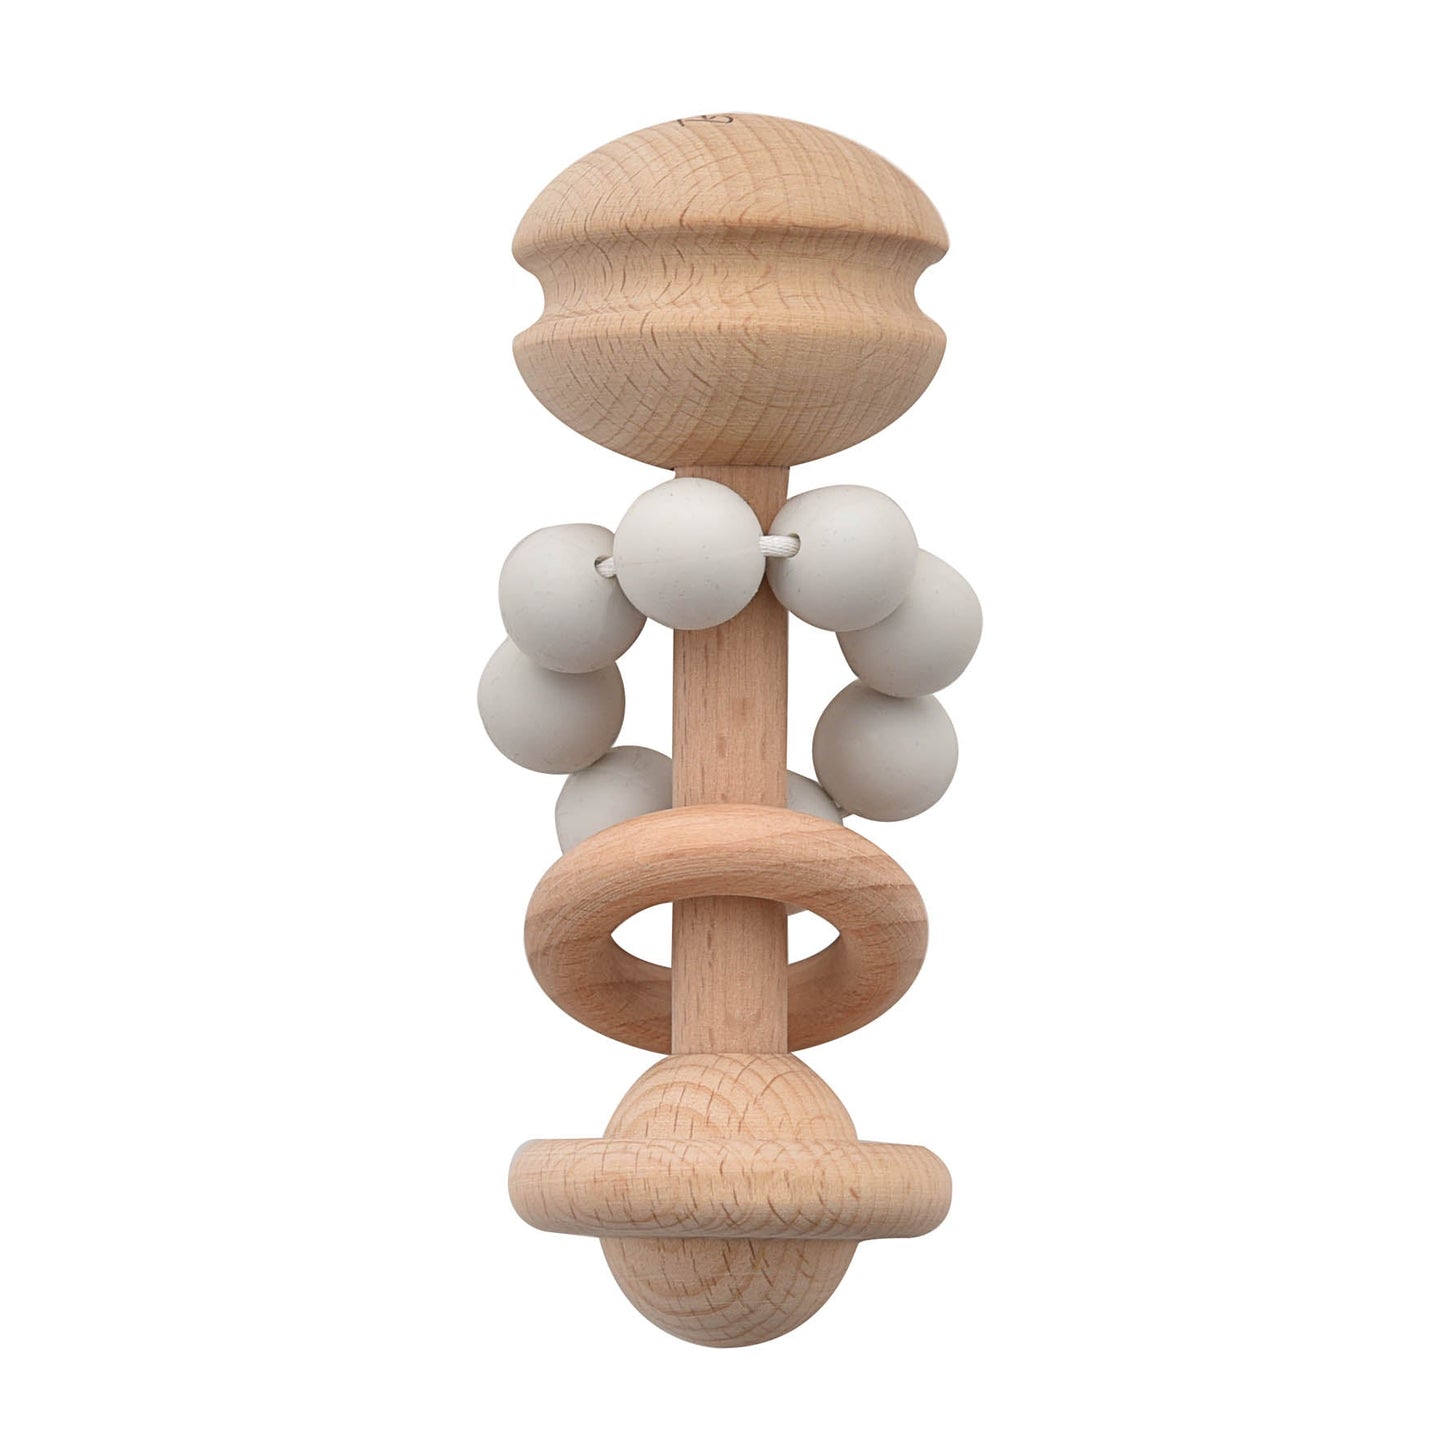 Silicone & Wood Rattle Teething Toy-Breda's Gift Shop